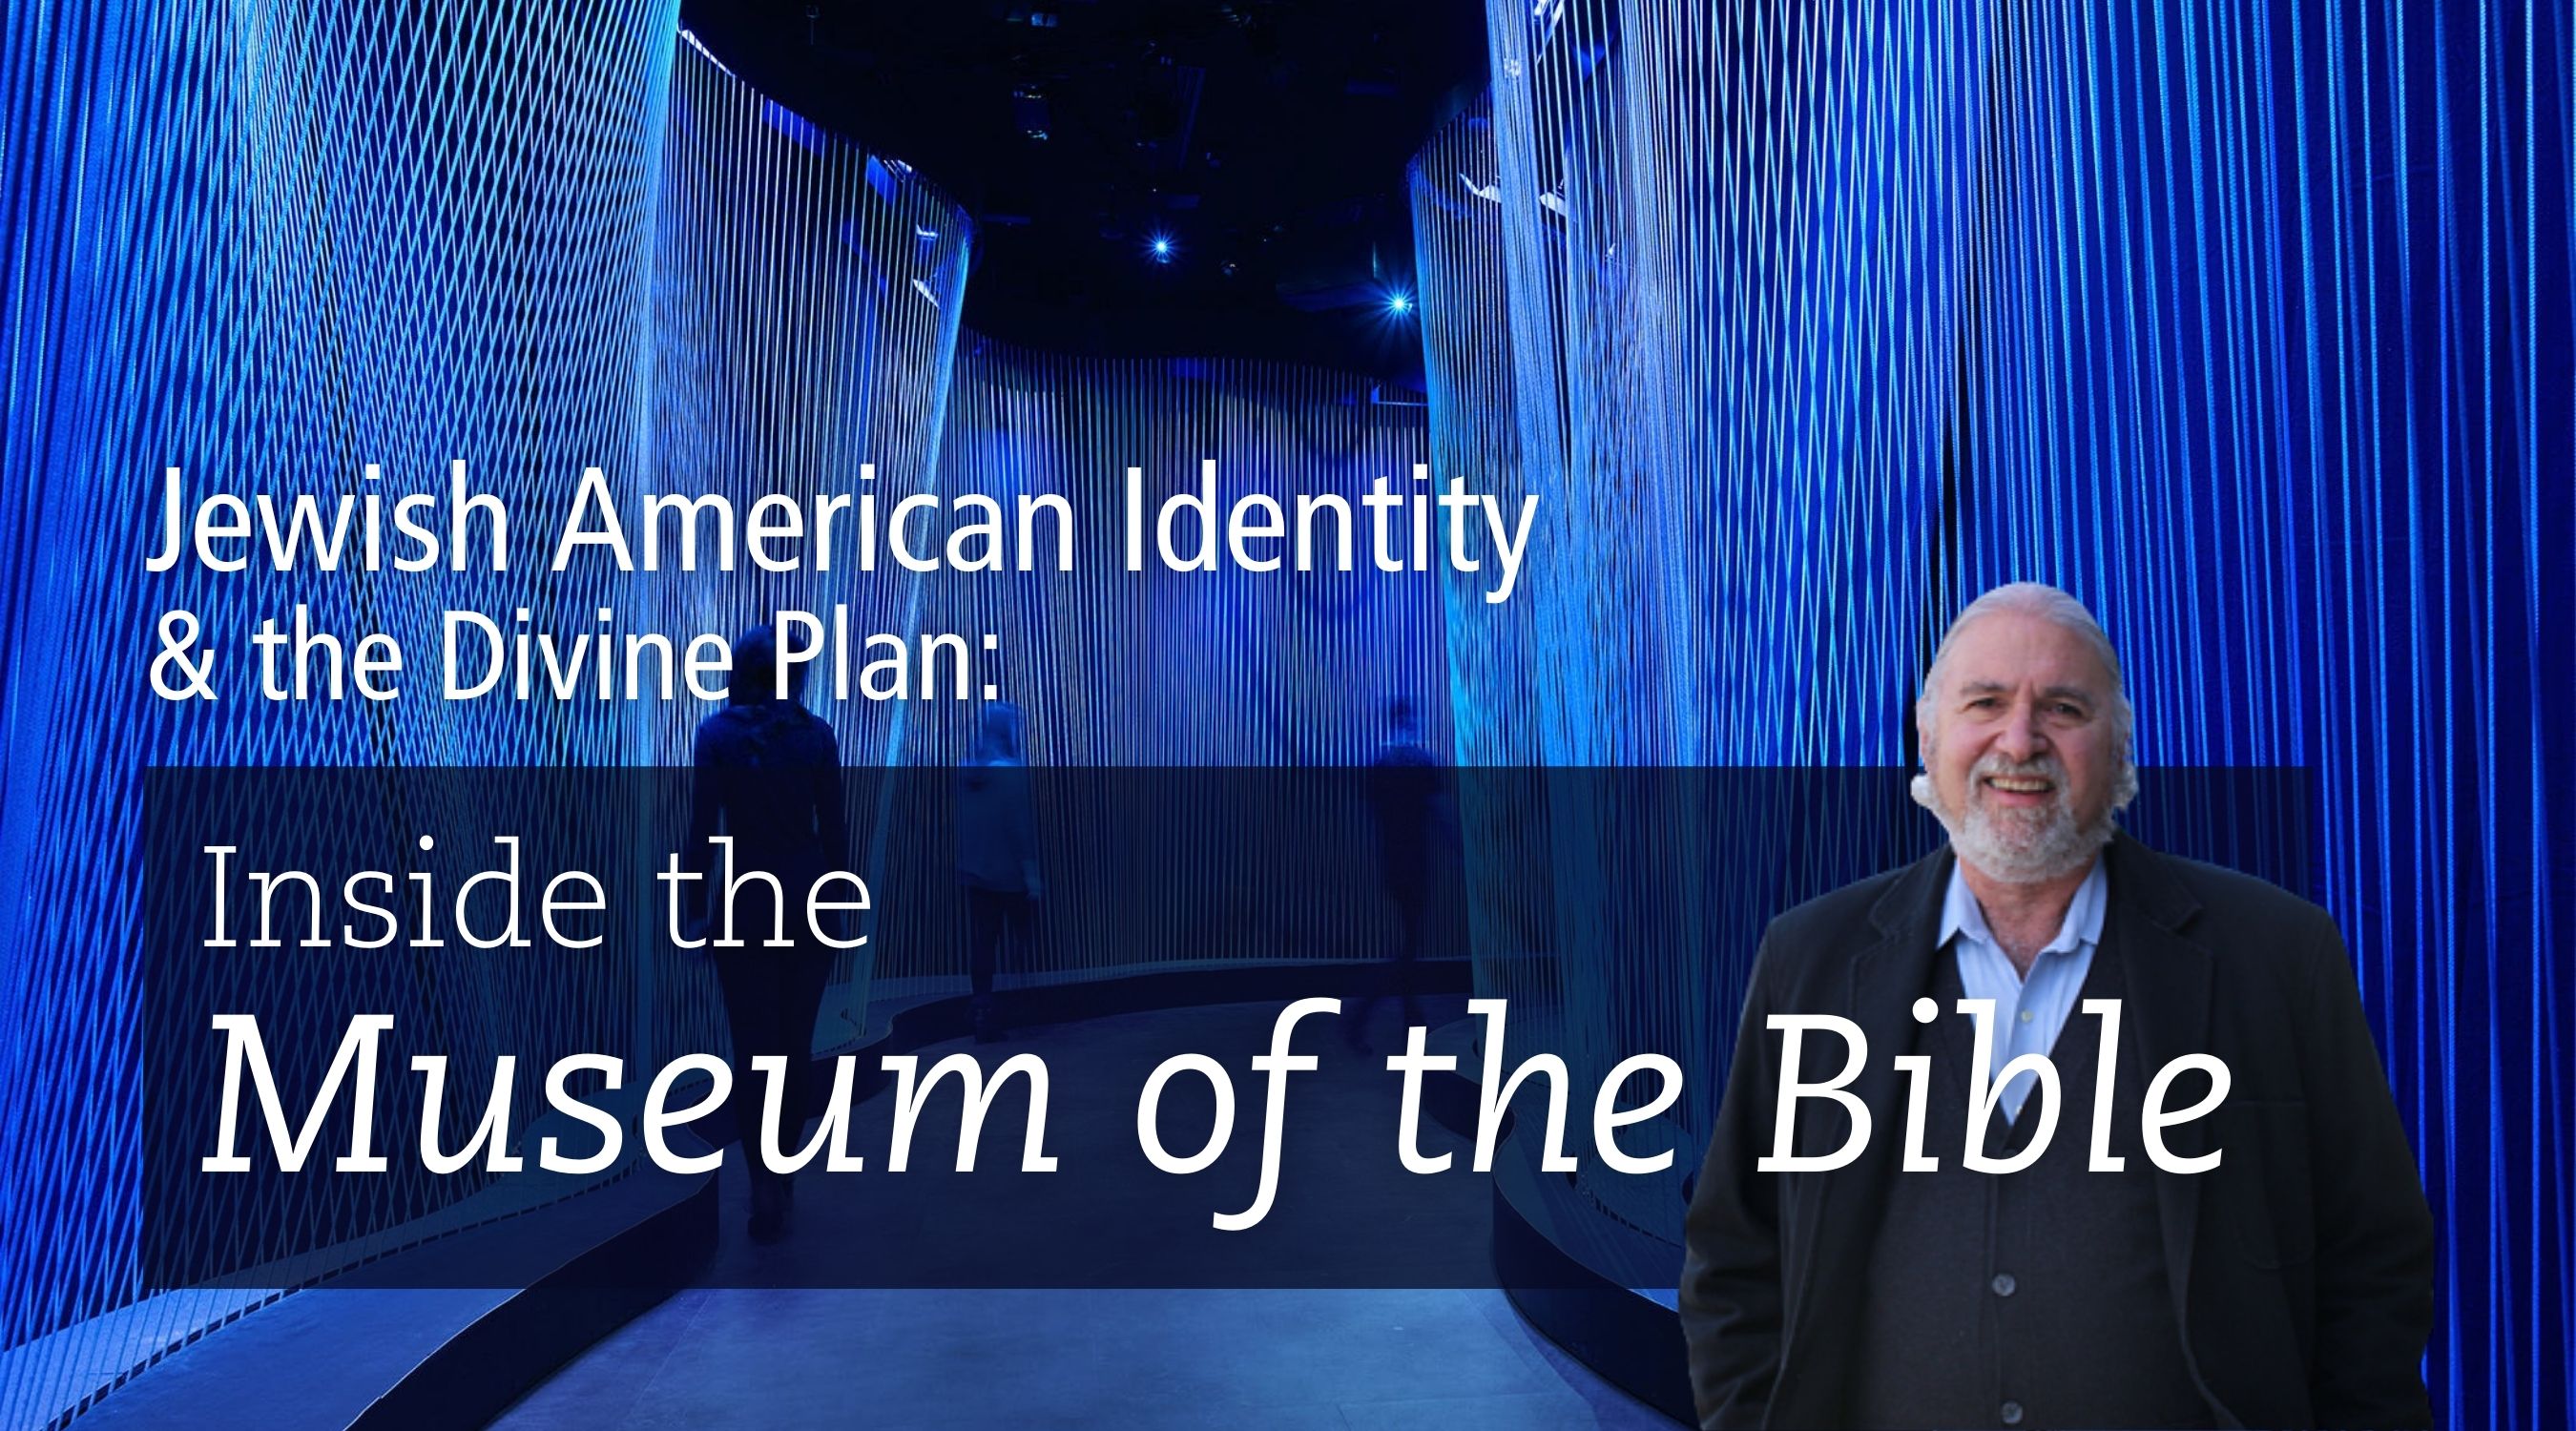 Jewish American Identity & the Divine Plan: Inside the Museum of the Bible